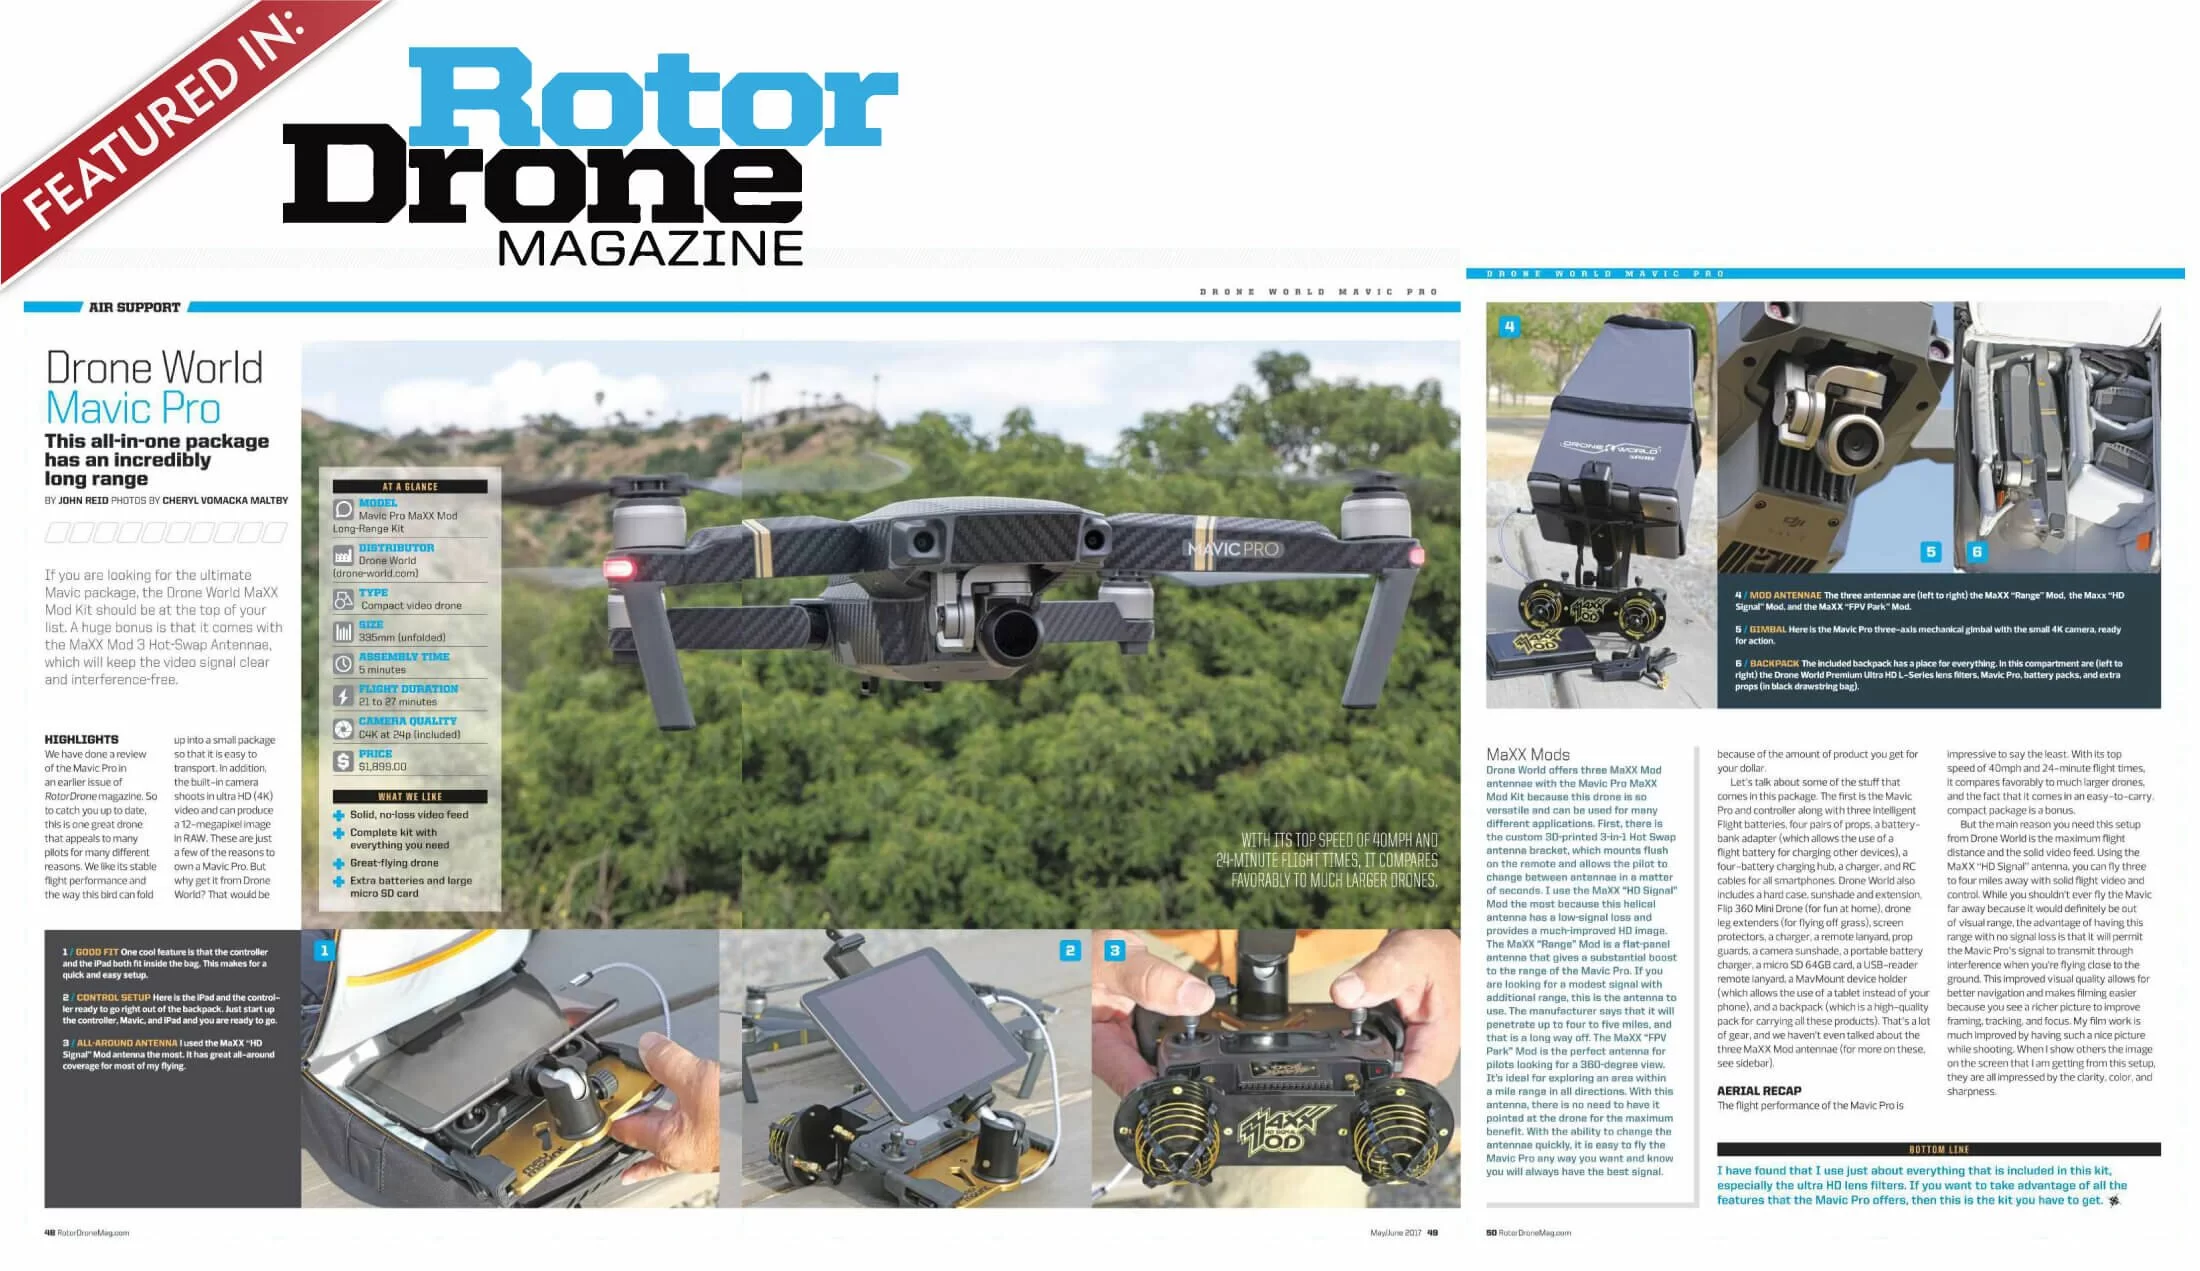 Drone World's Maxx Mod featured on RotorDrone Magazine